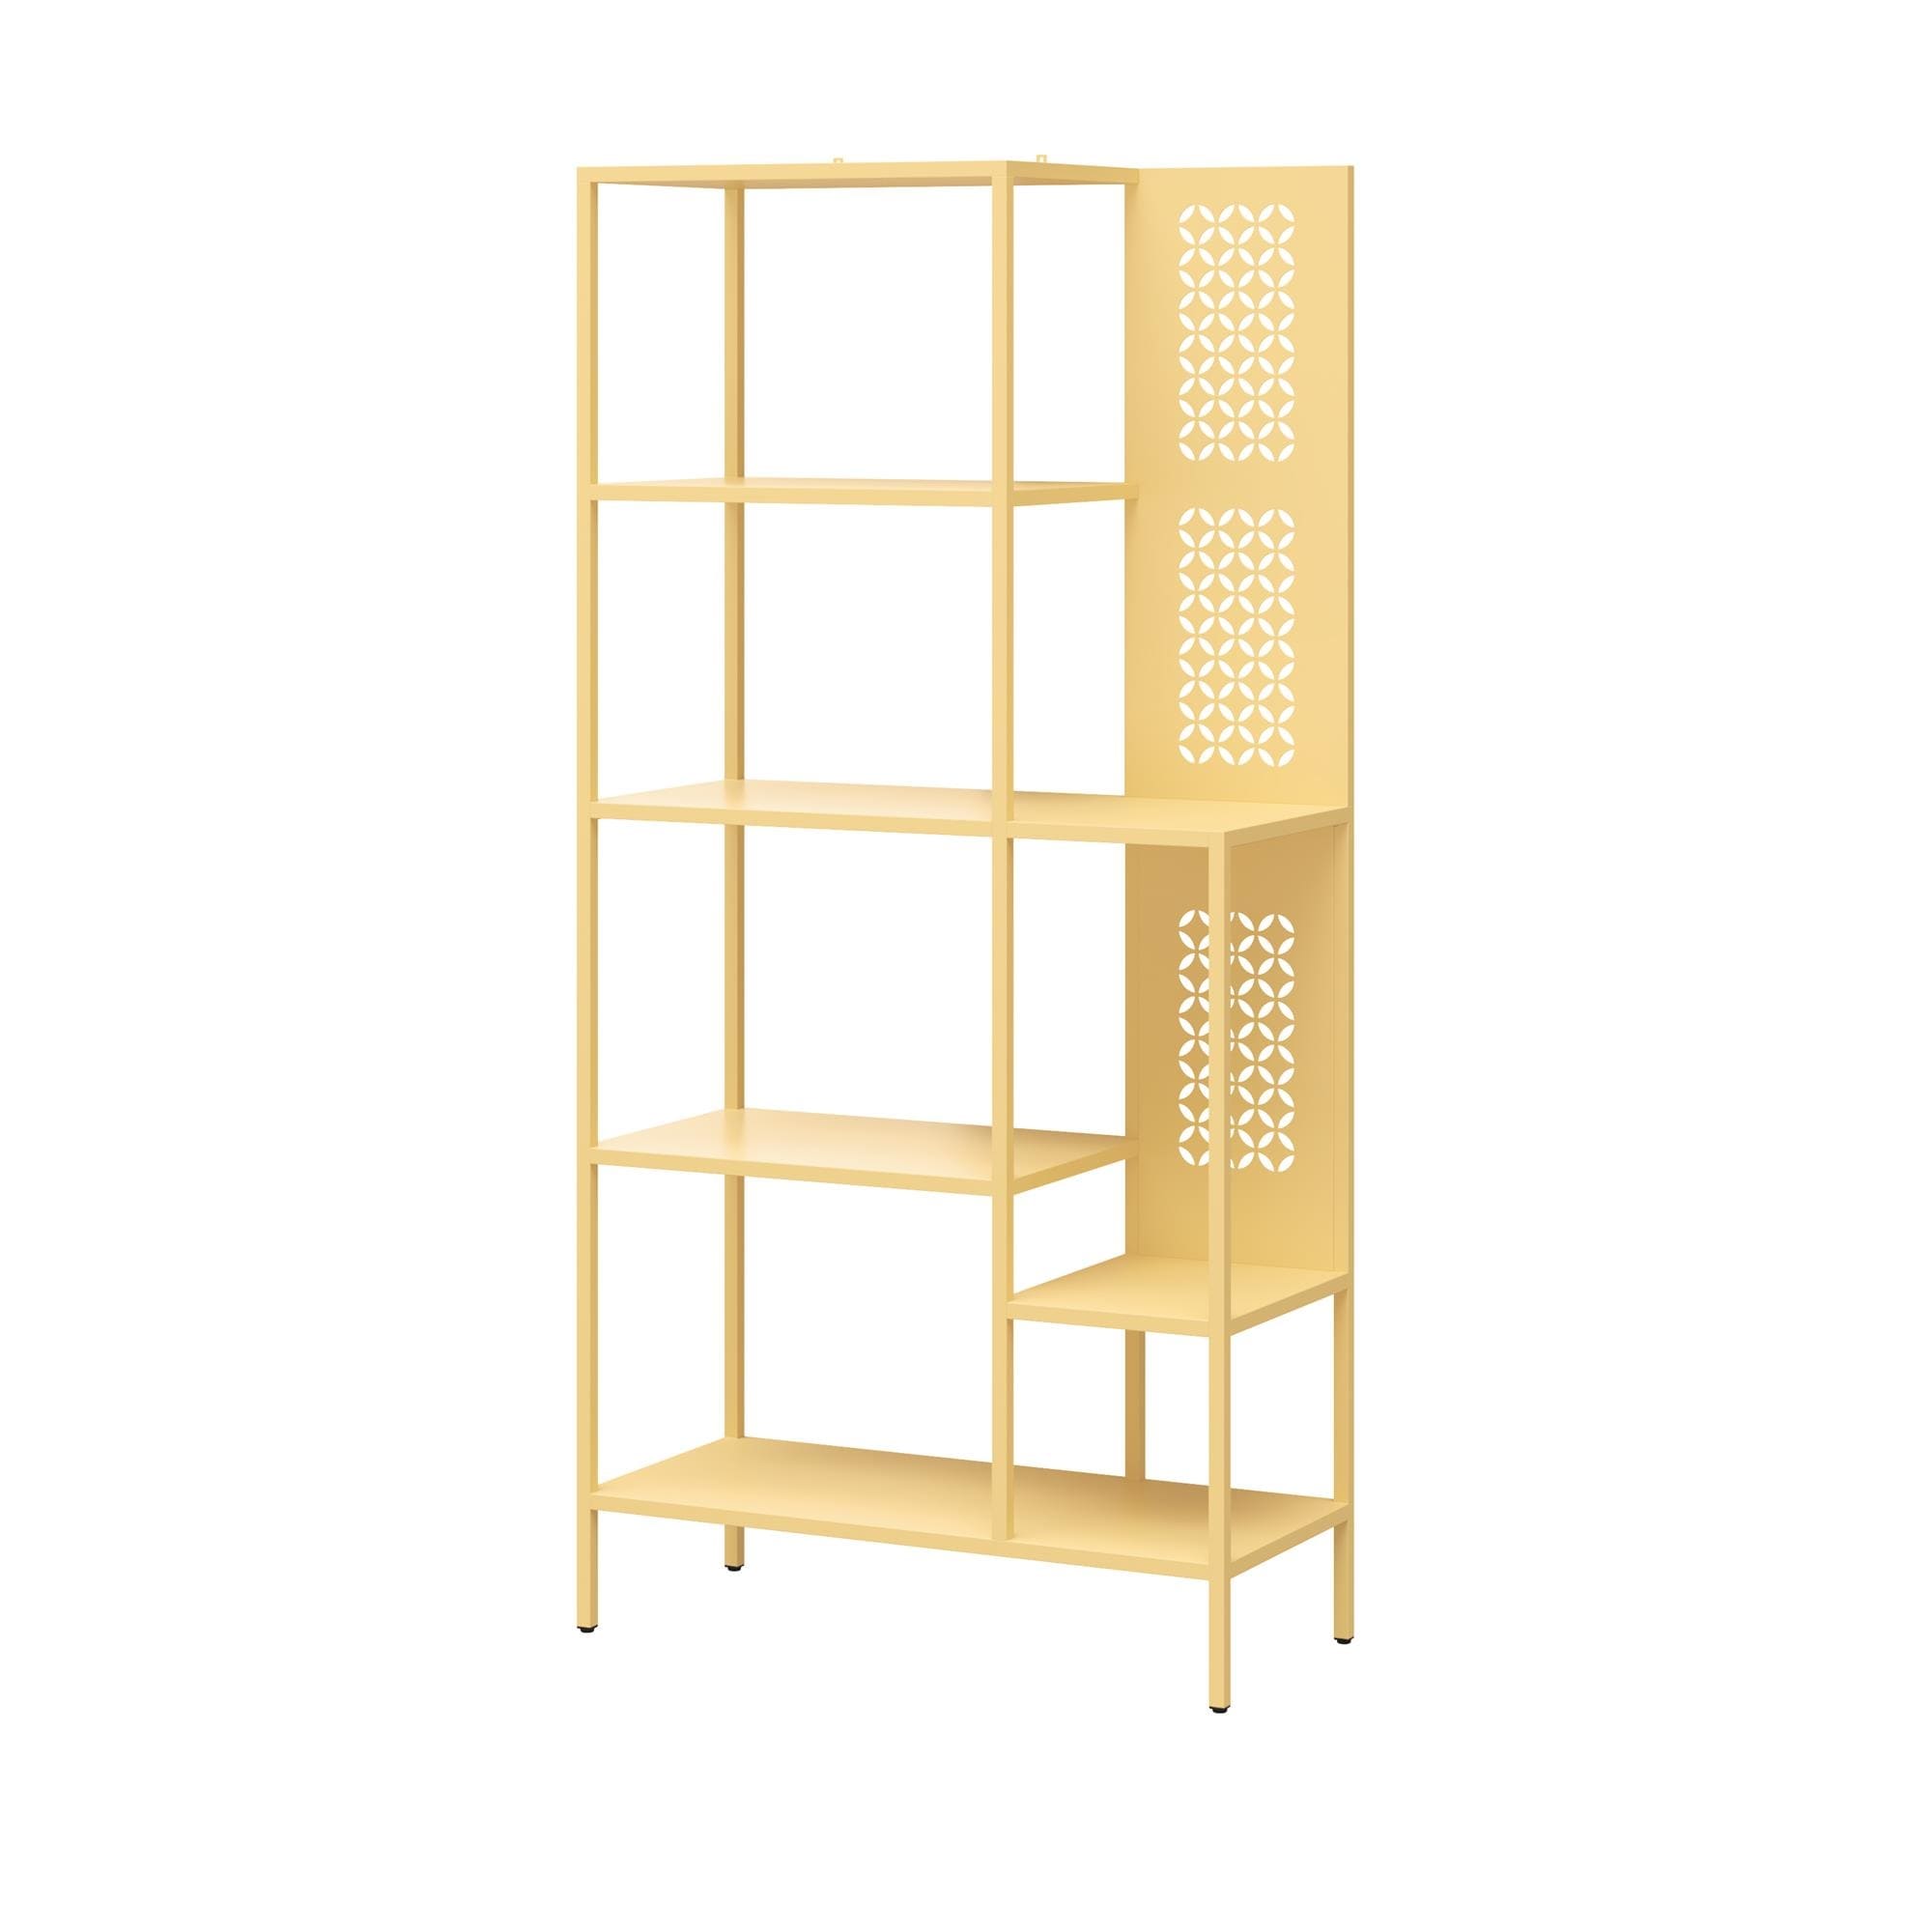 https://ak1.ostkcdn.com/images/products/is/images/direct/b154dc1458a14c46aa240c22364c1194ced2d88a/Mr.-Kate-Annie-Metal-Bookcase.jpg